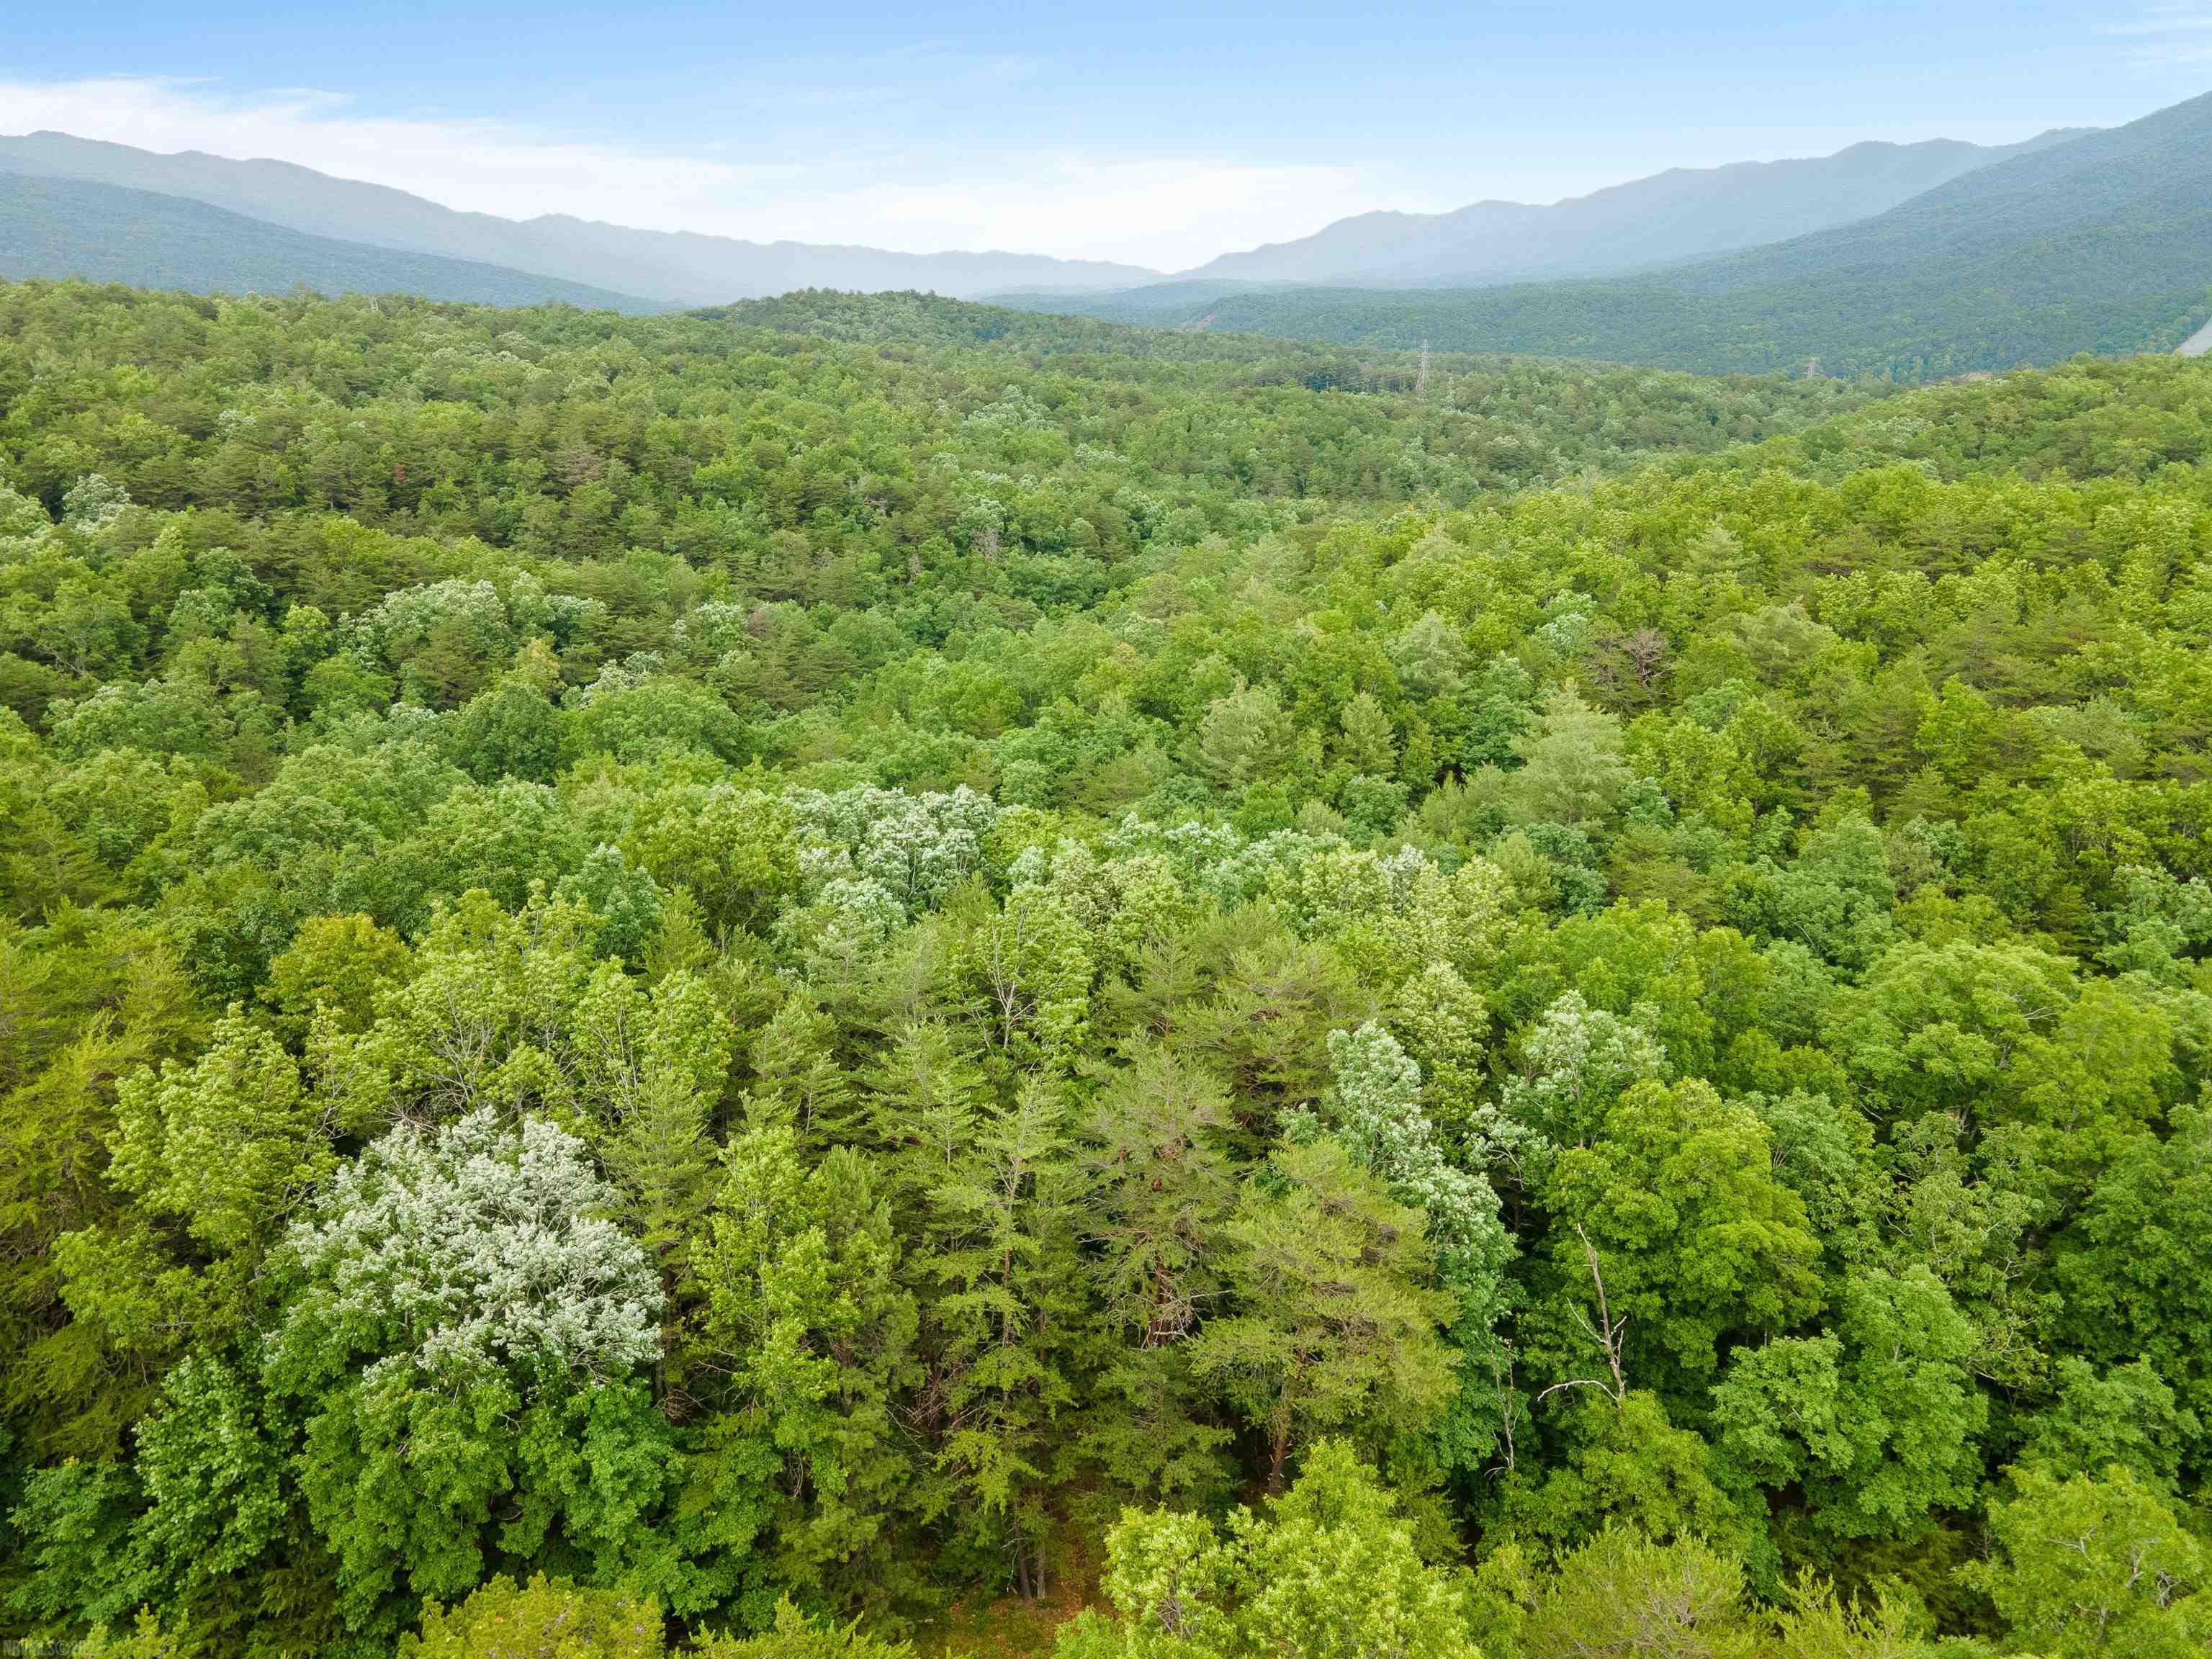 Ready to build your dream home? With over 2.7 acres of land look no further than this great opportunity in the highly desirable subdivision, The Ridges. Quiet and secluded location but minutes from I-81 & 460 to either Roanoke or Christiansburg & Blacksburg. Don't miss out on this great opportunity!!